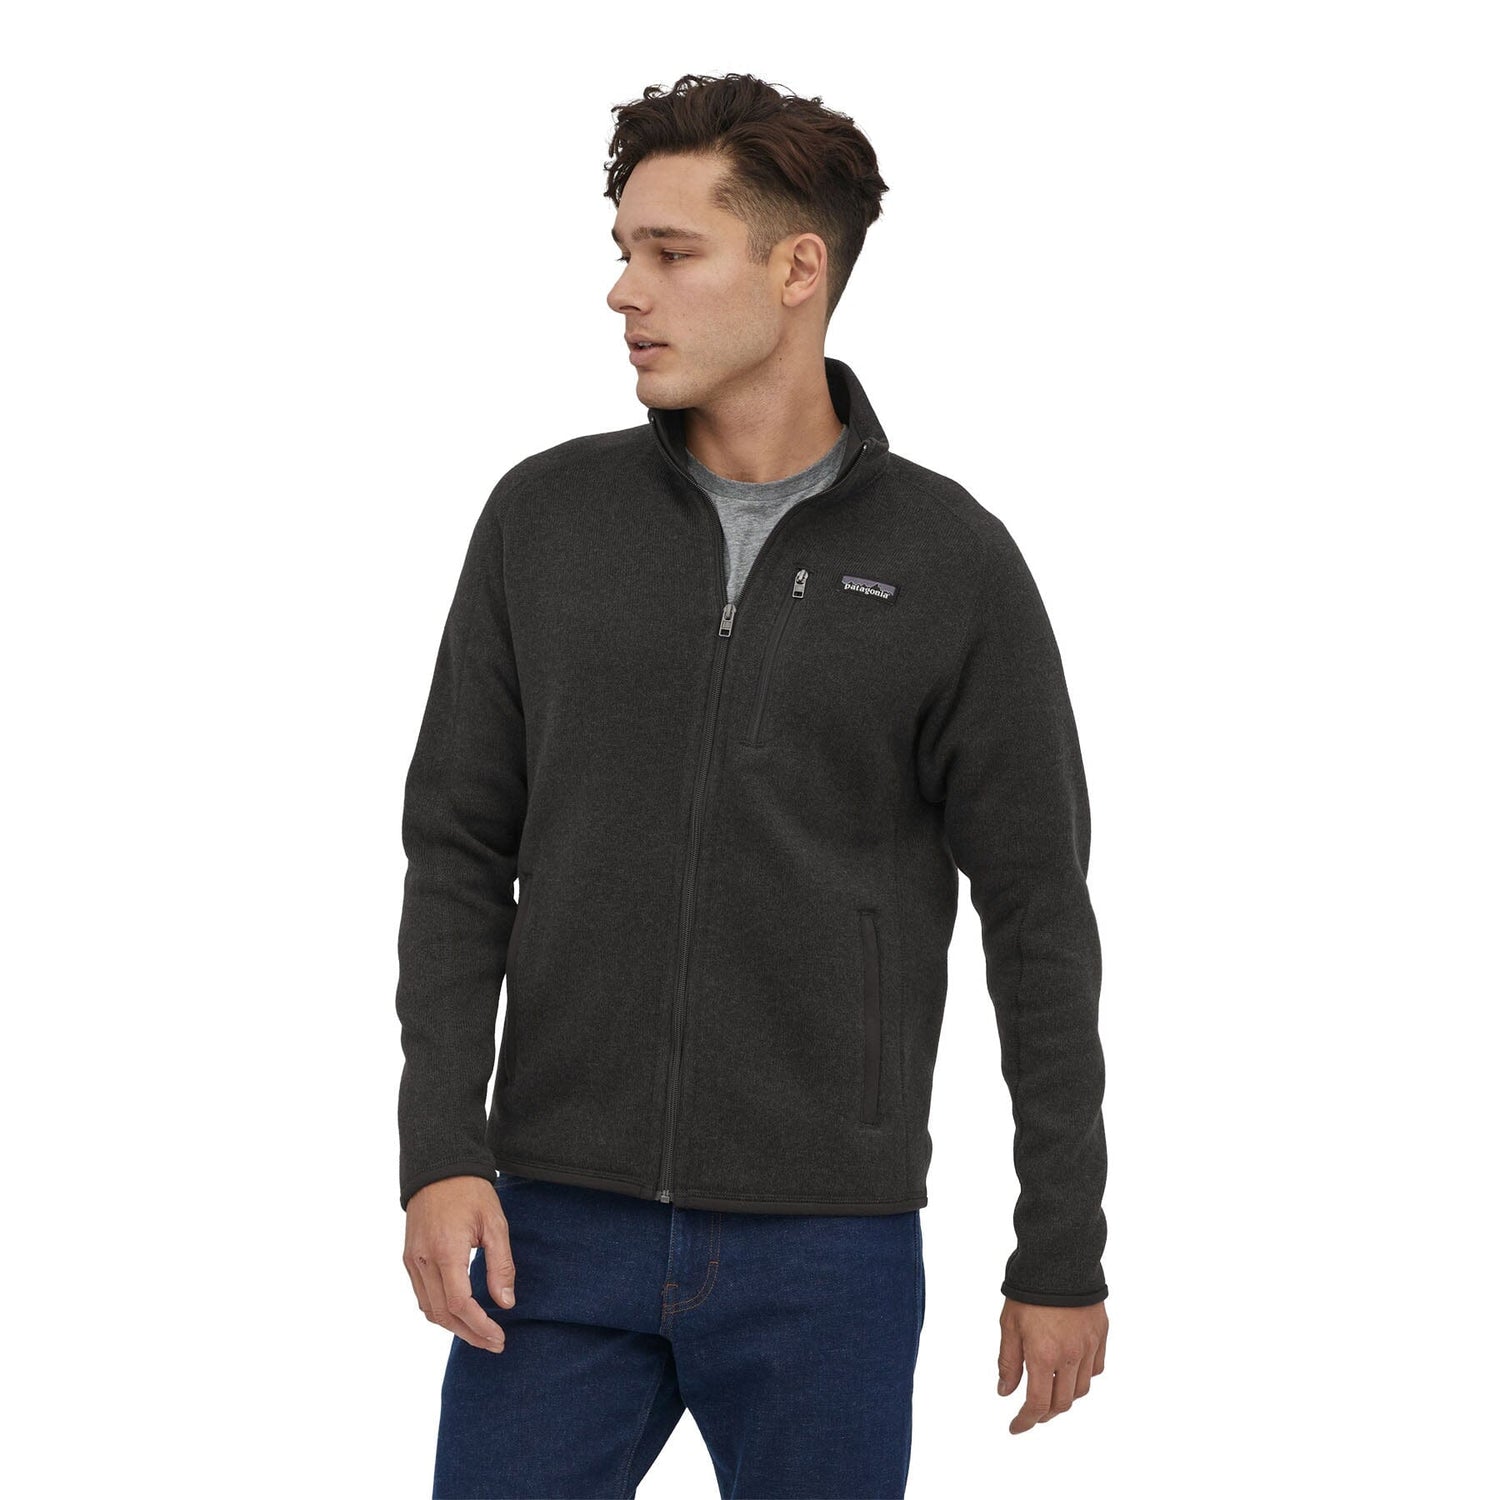 Patagonia M's Better Sweater Fleece Jacket - 100 % recycled polyester Black Shirt